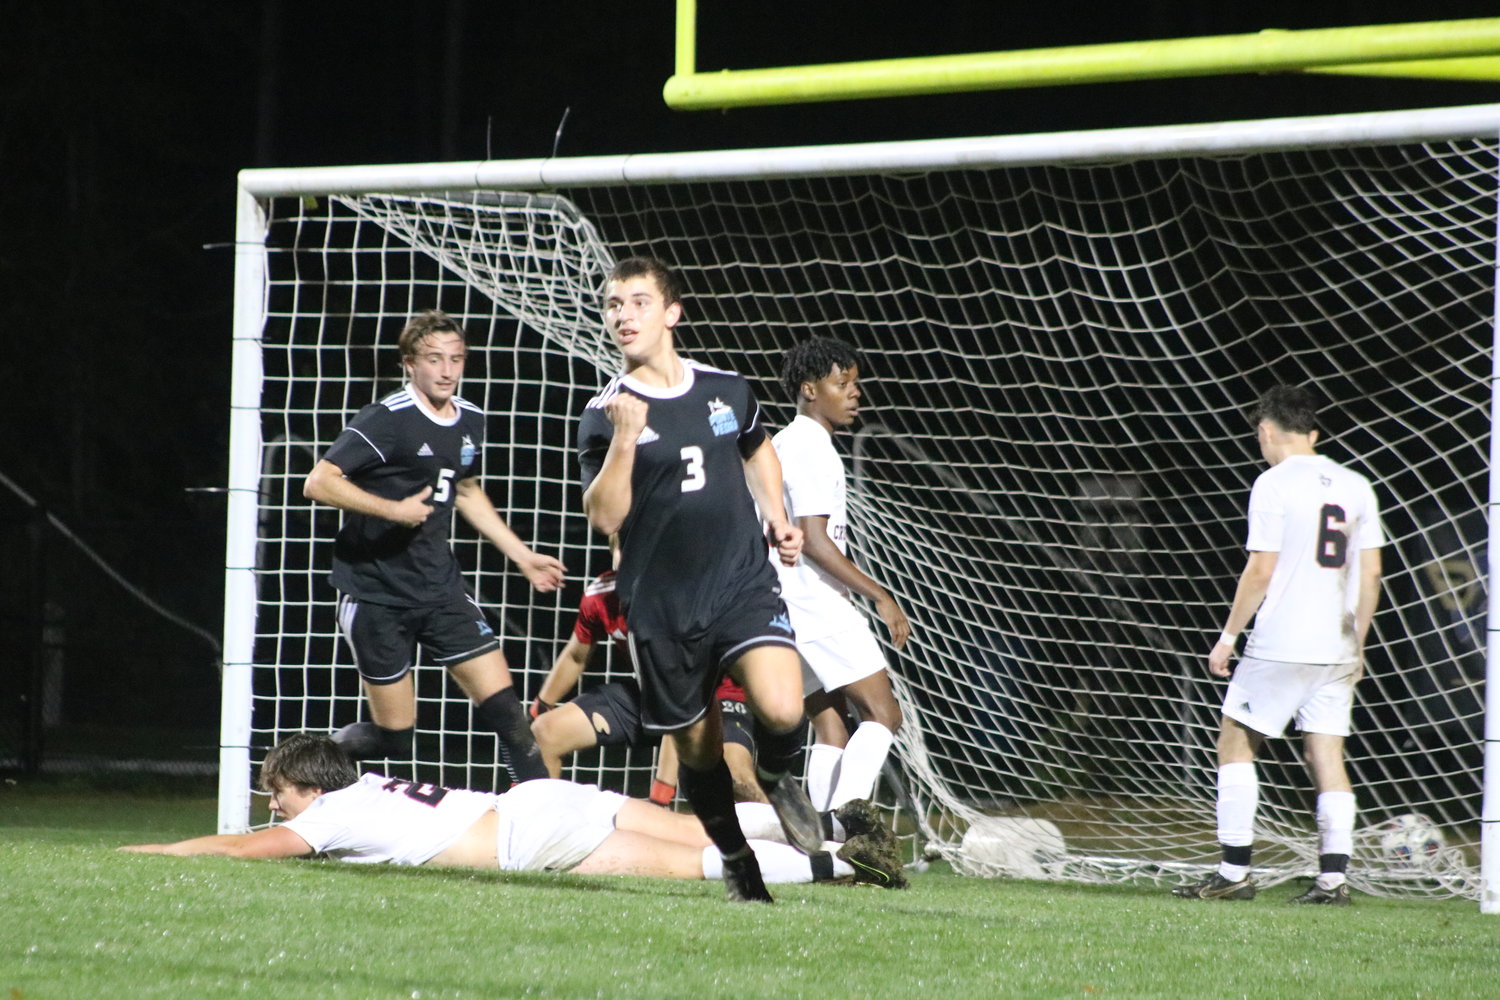 Joey Stephens turns to celebrate with his teammates immediately after scoring a goal against Bishop Kenny Jan. 5.